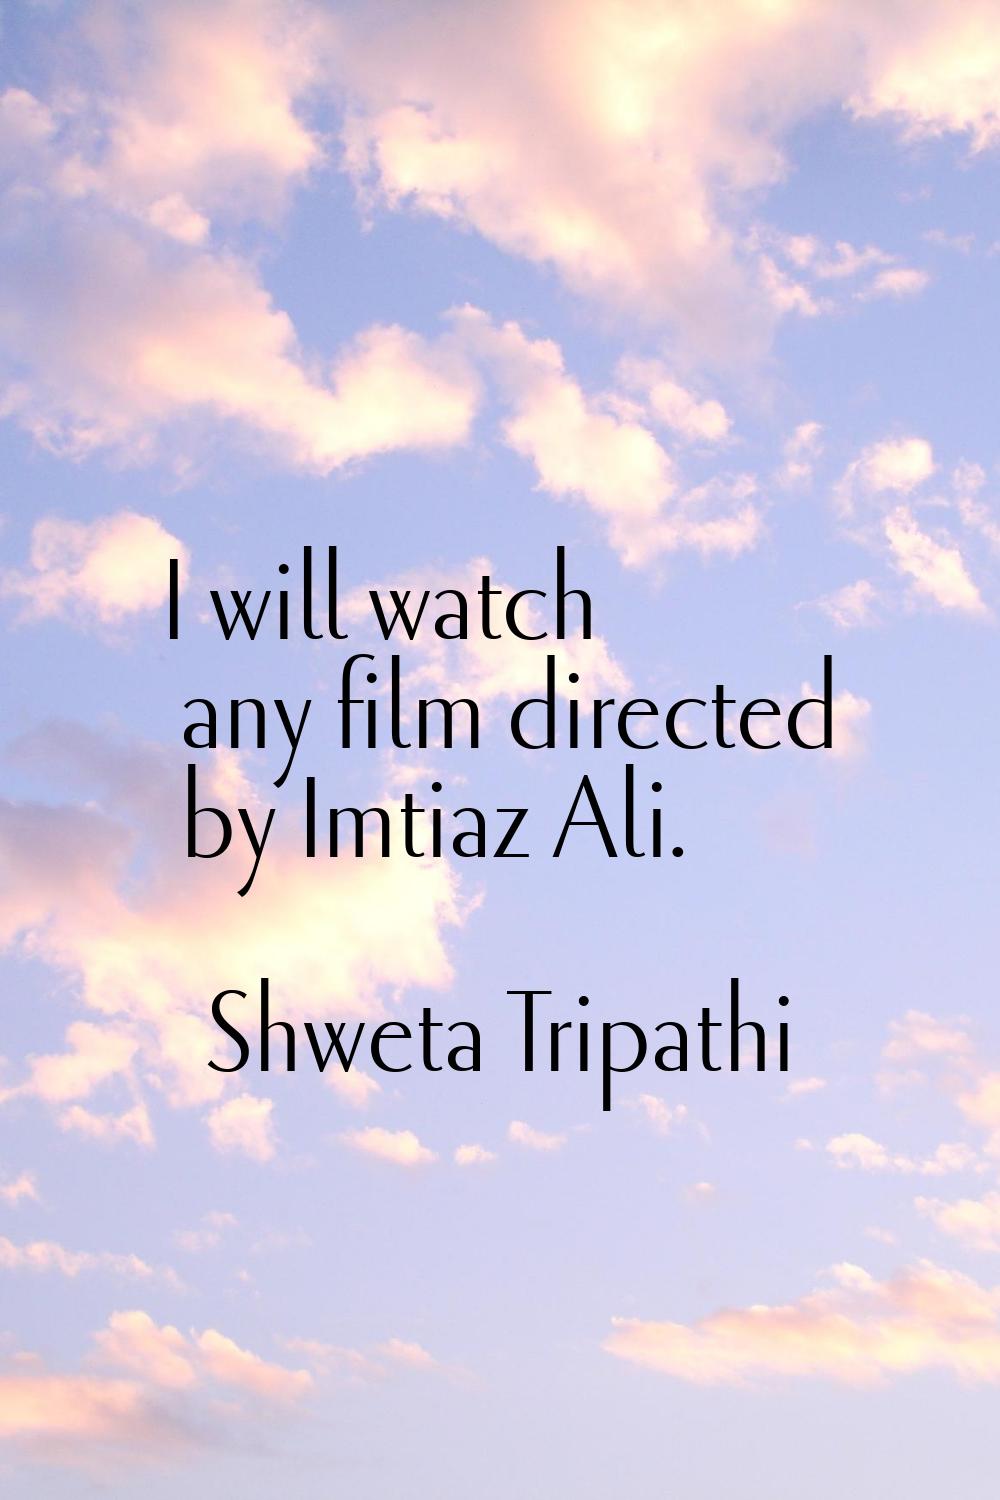 I will watch any film directed by Imtiaz Ali.